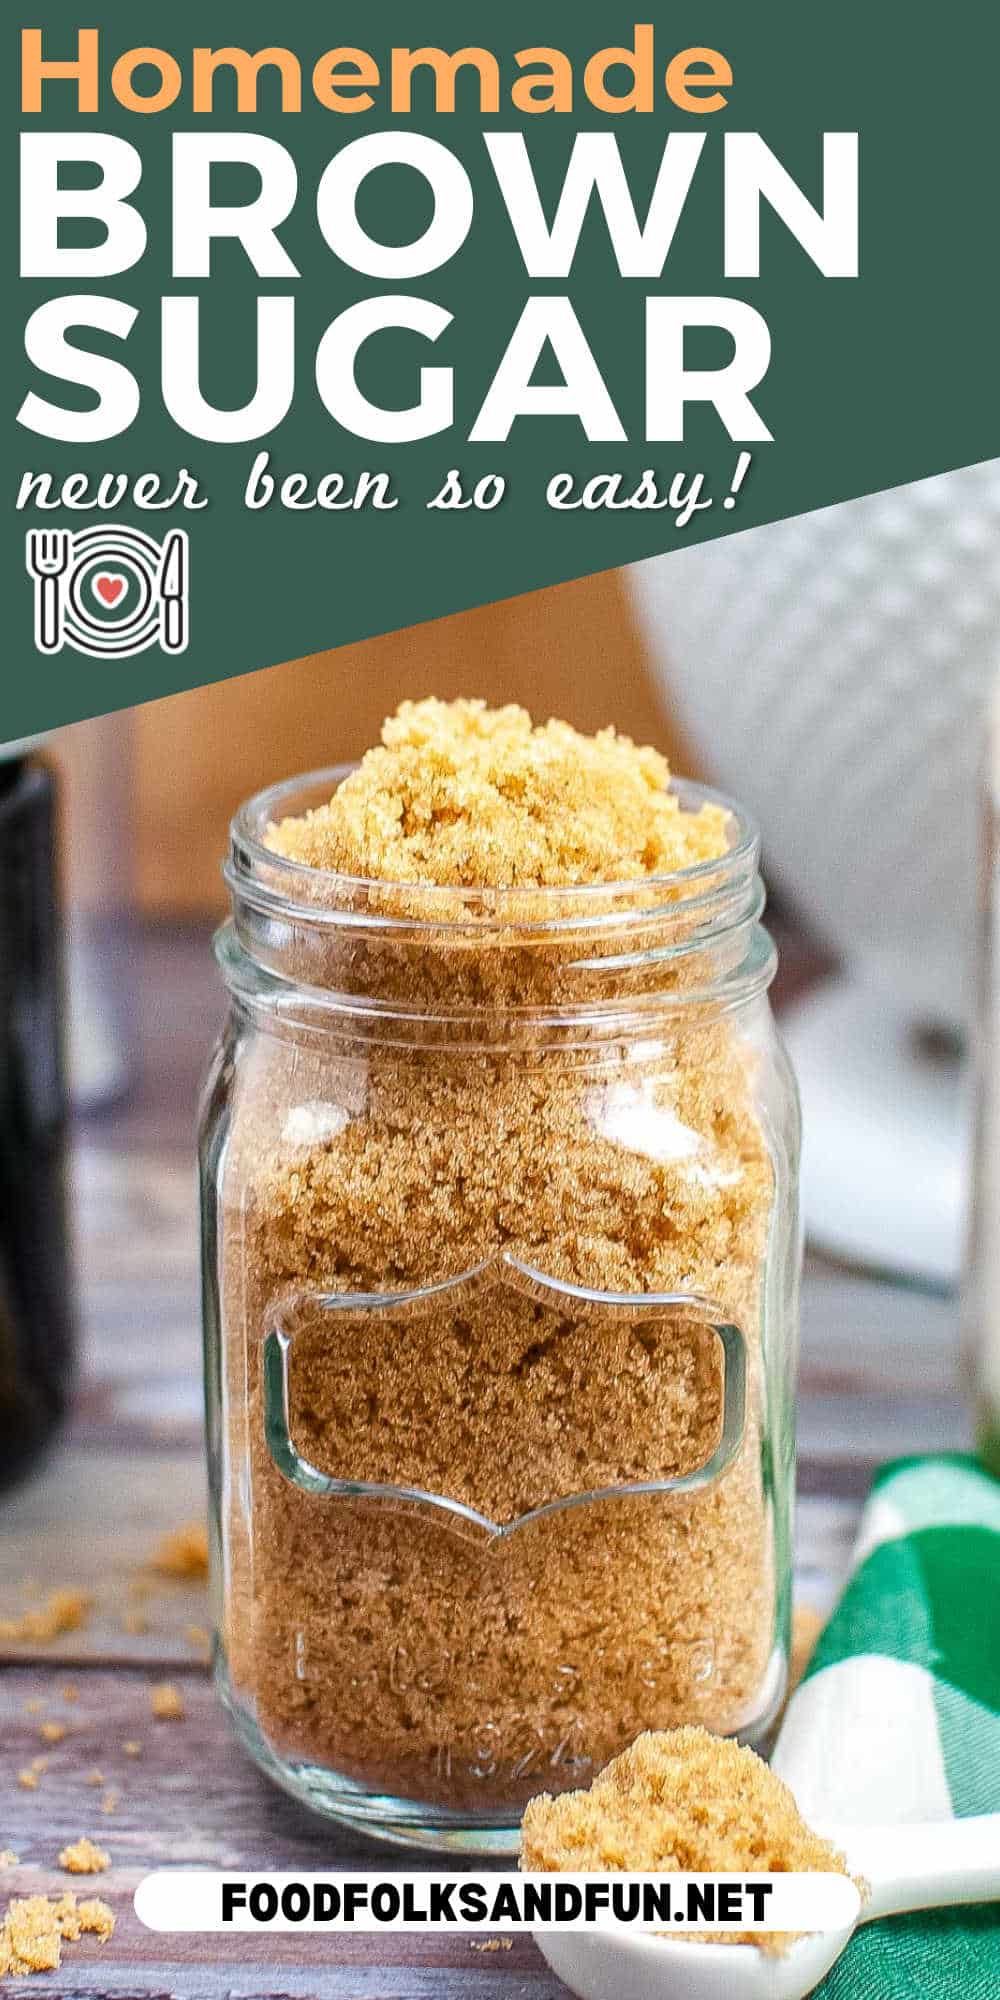 Homemade Brown Sugar is easy to make and tastes like store-bought brown sugar. Plus, it’s cost-effective, too! via @foodfolksandfun